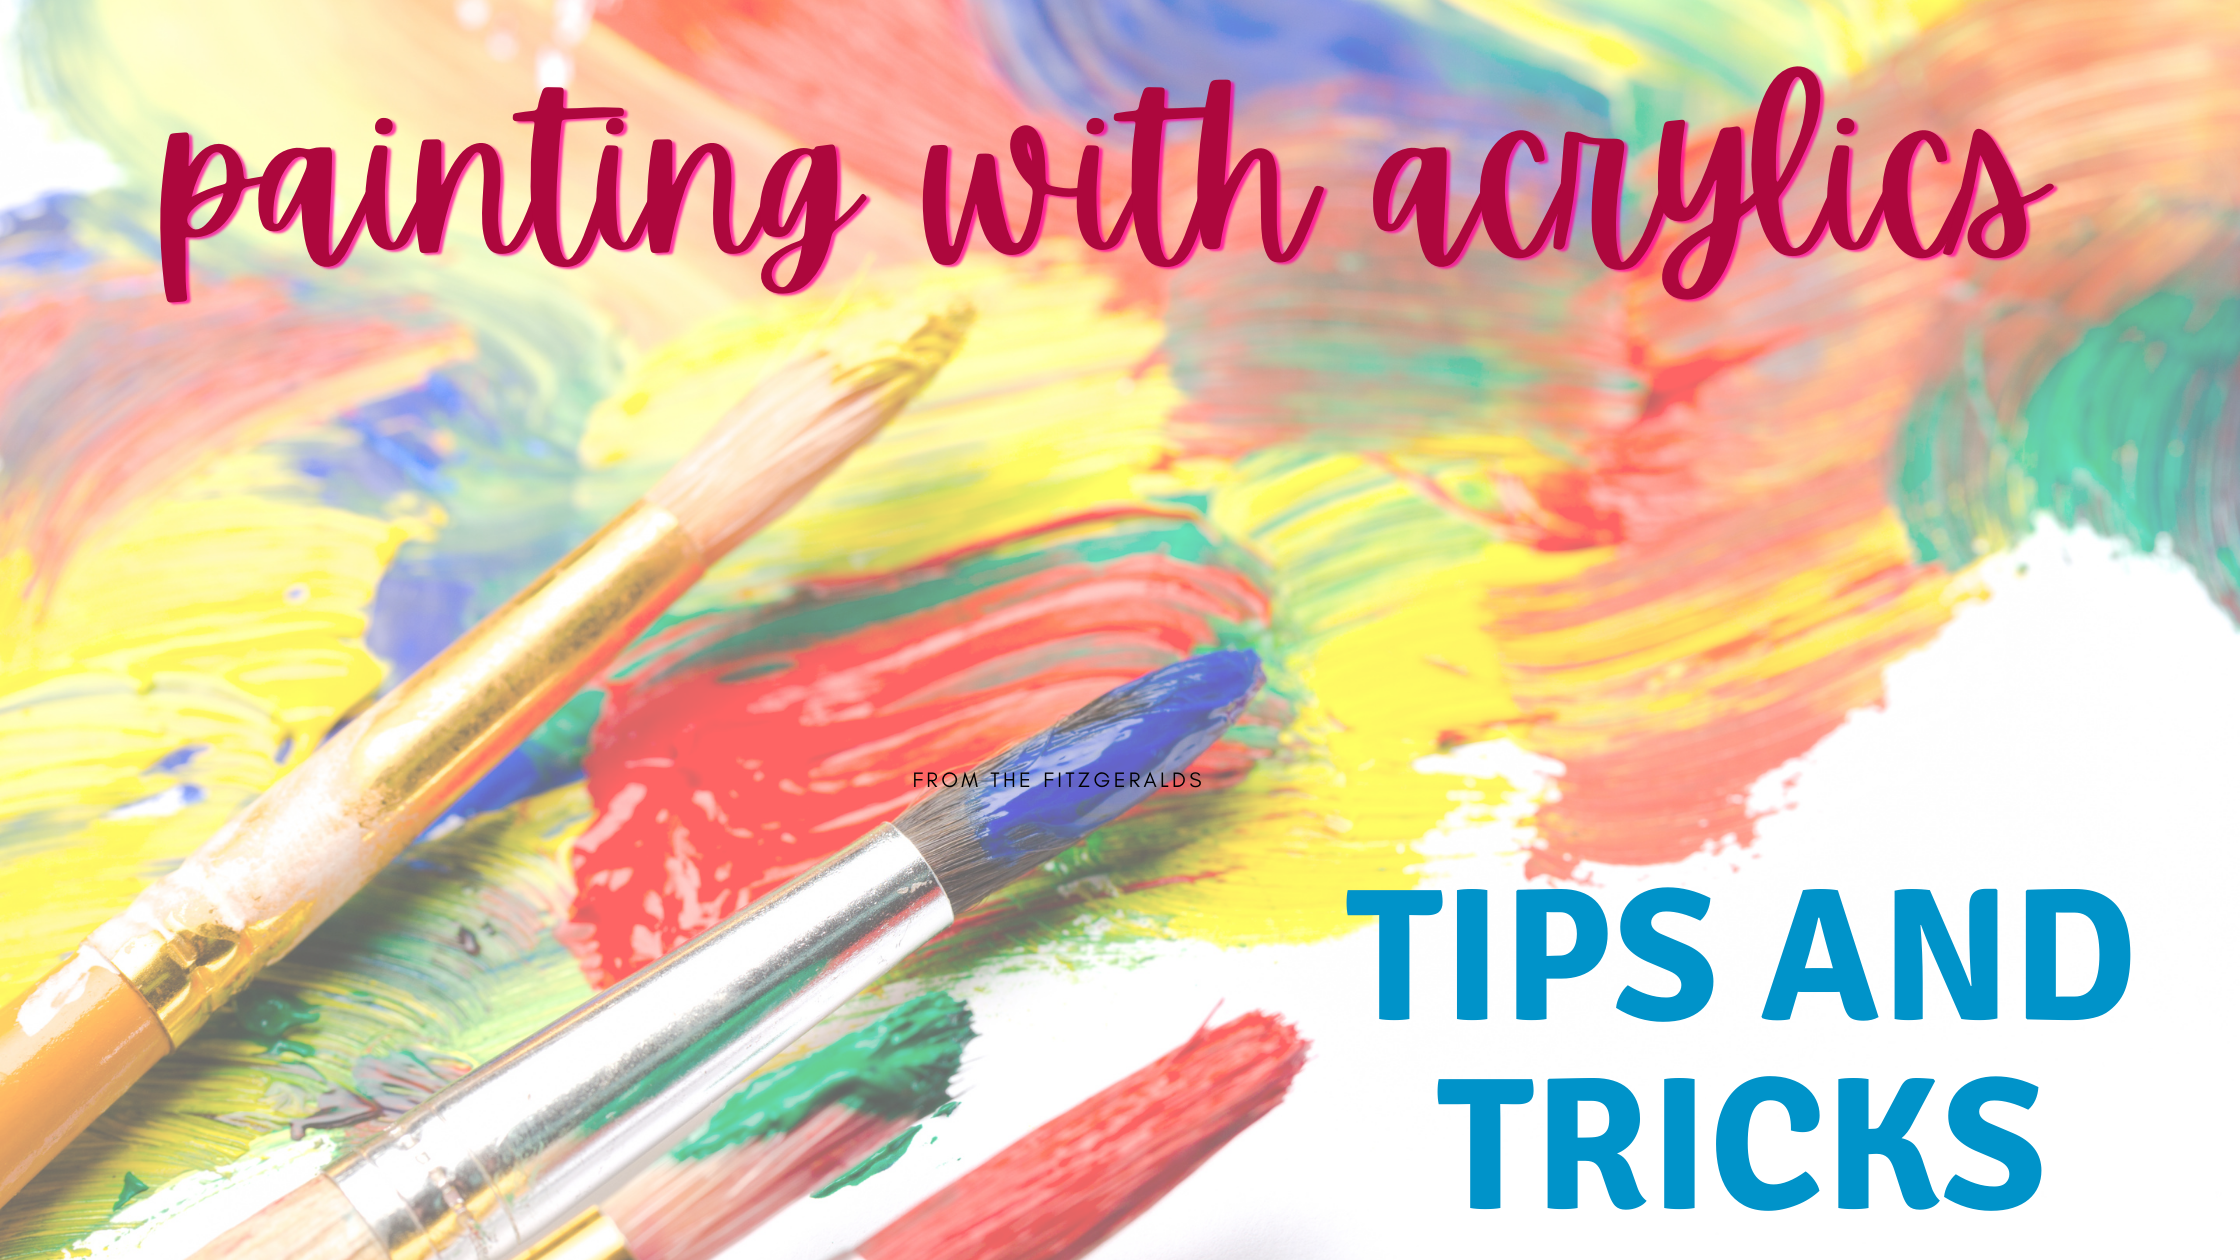 7 Tips and Tricks for Painting with Acrylics - Pinot's Palette